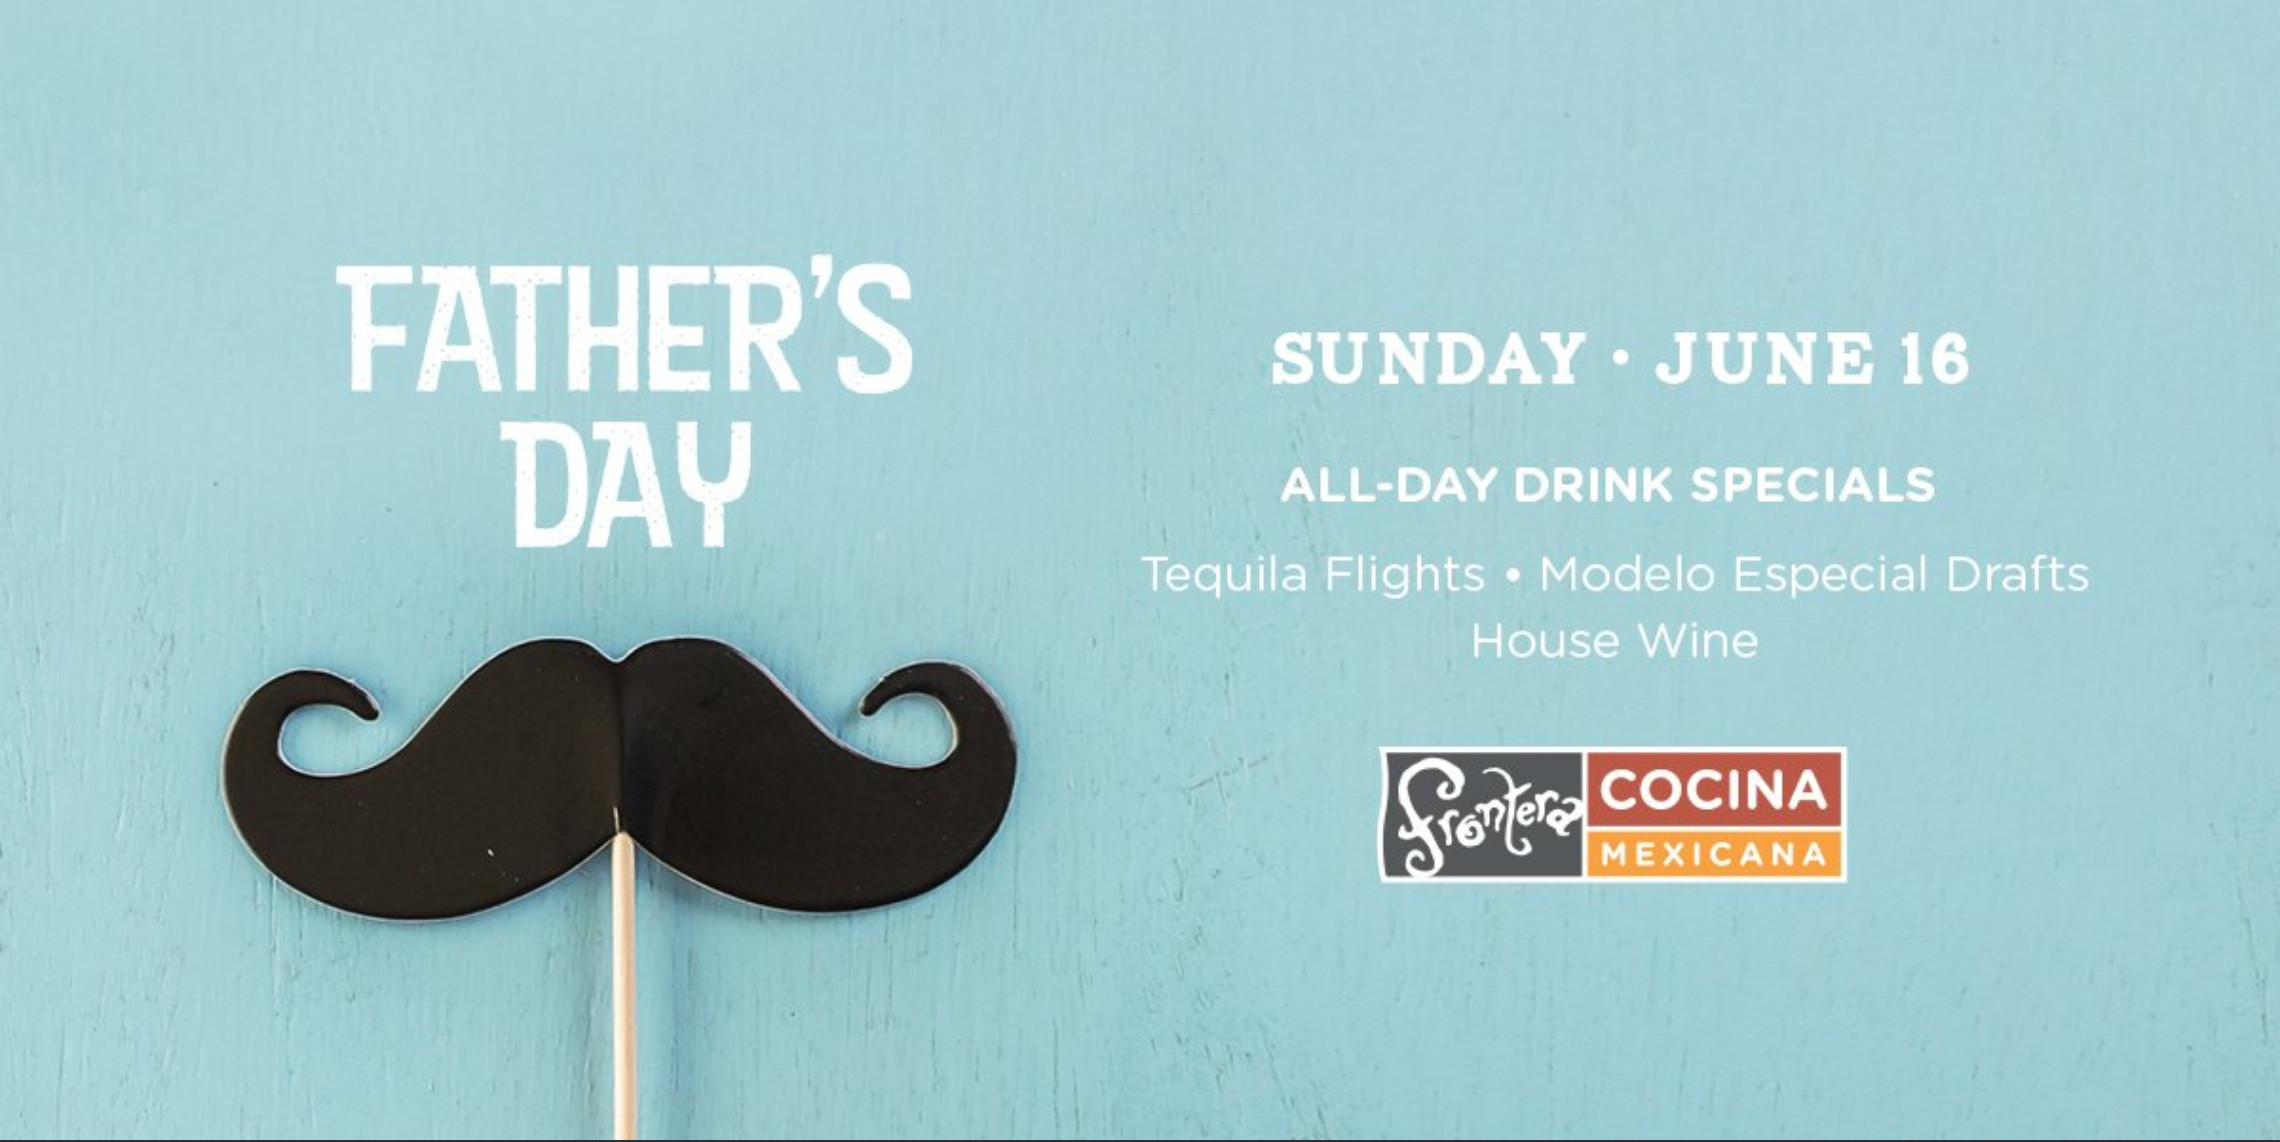 Fathers Day Food Specials
 Celebrate Father’s Day at Frontera Cocina in Disney